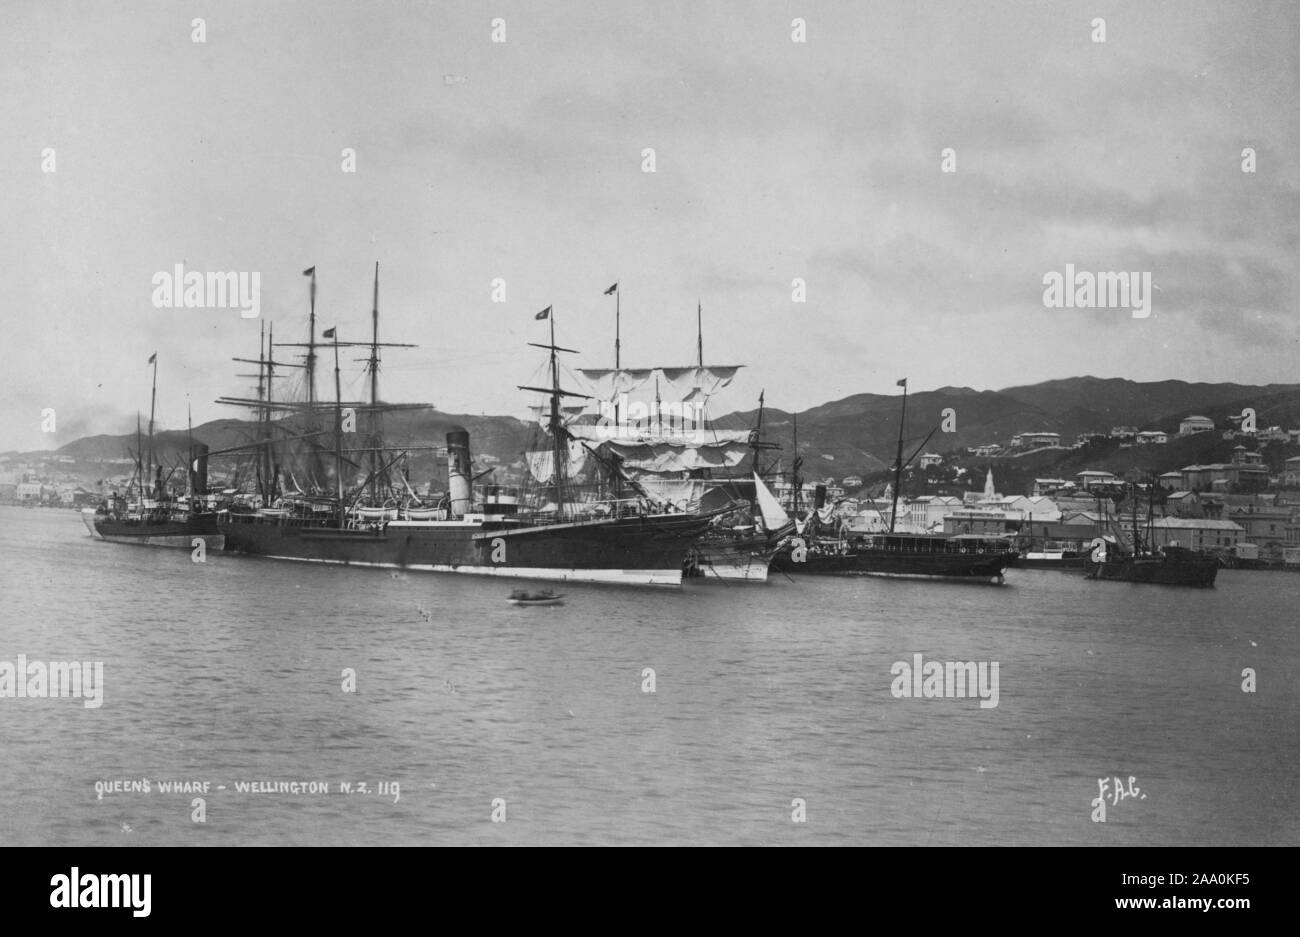 Black and white landscape photograph of ships at the Queens Wharf, Lambton Harbour in Wellington, New Zealand, by photographer Frank Coxhead, 1885. From the New York Public Library. () Stock Photo